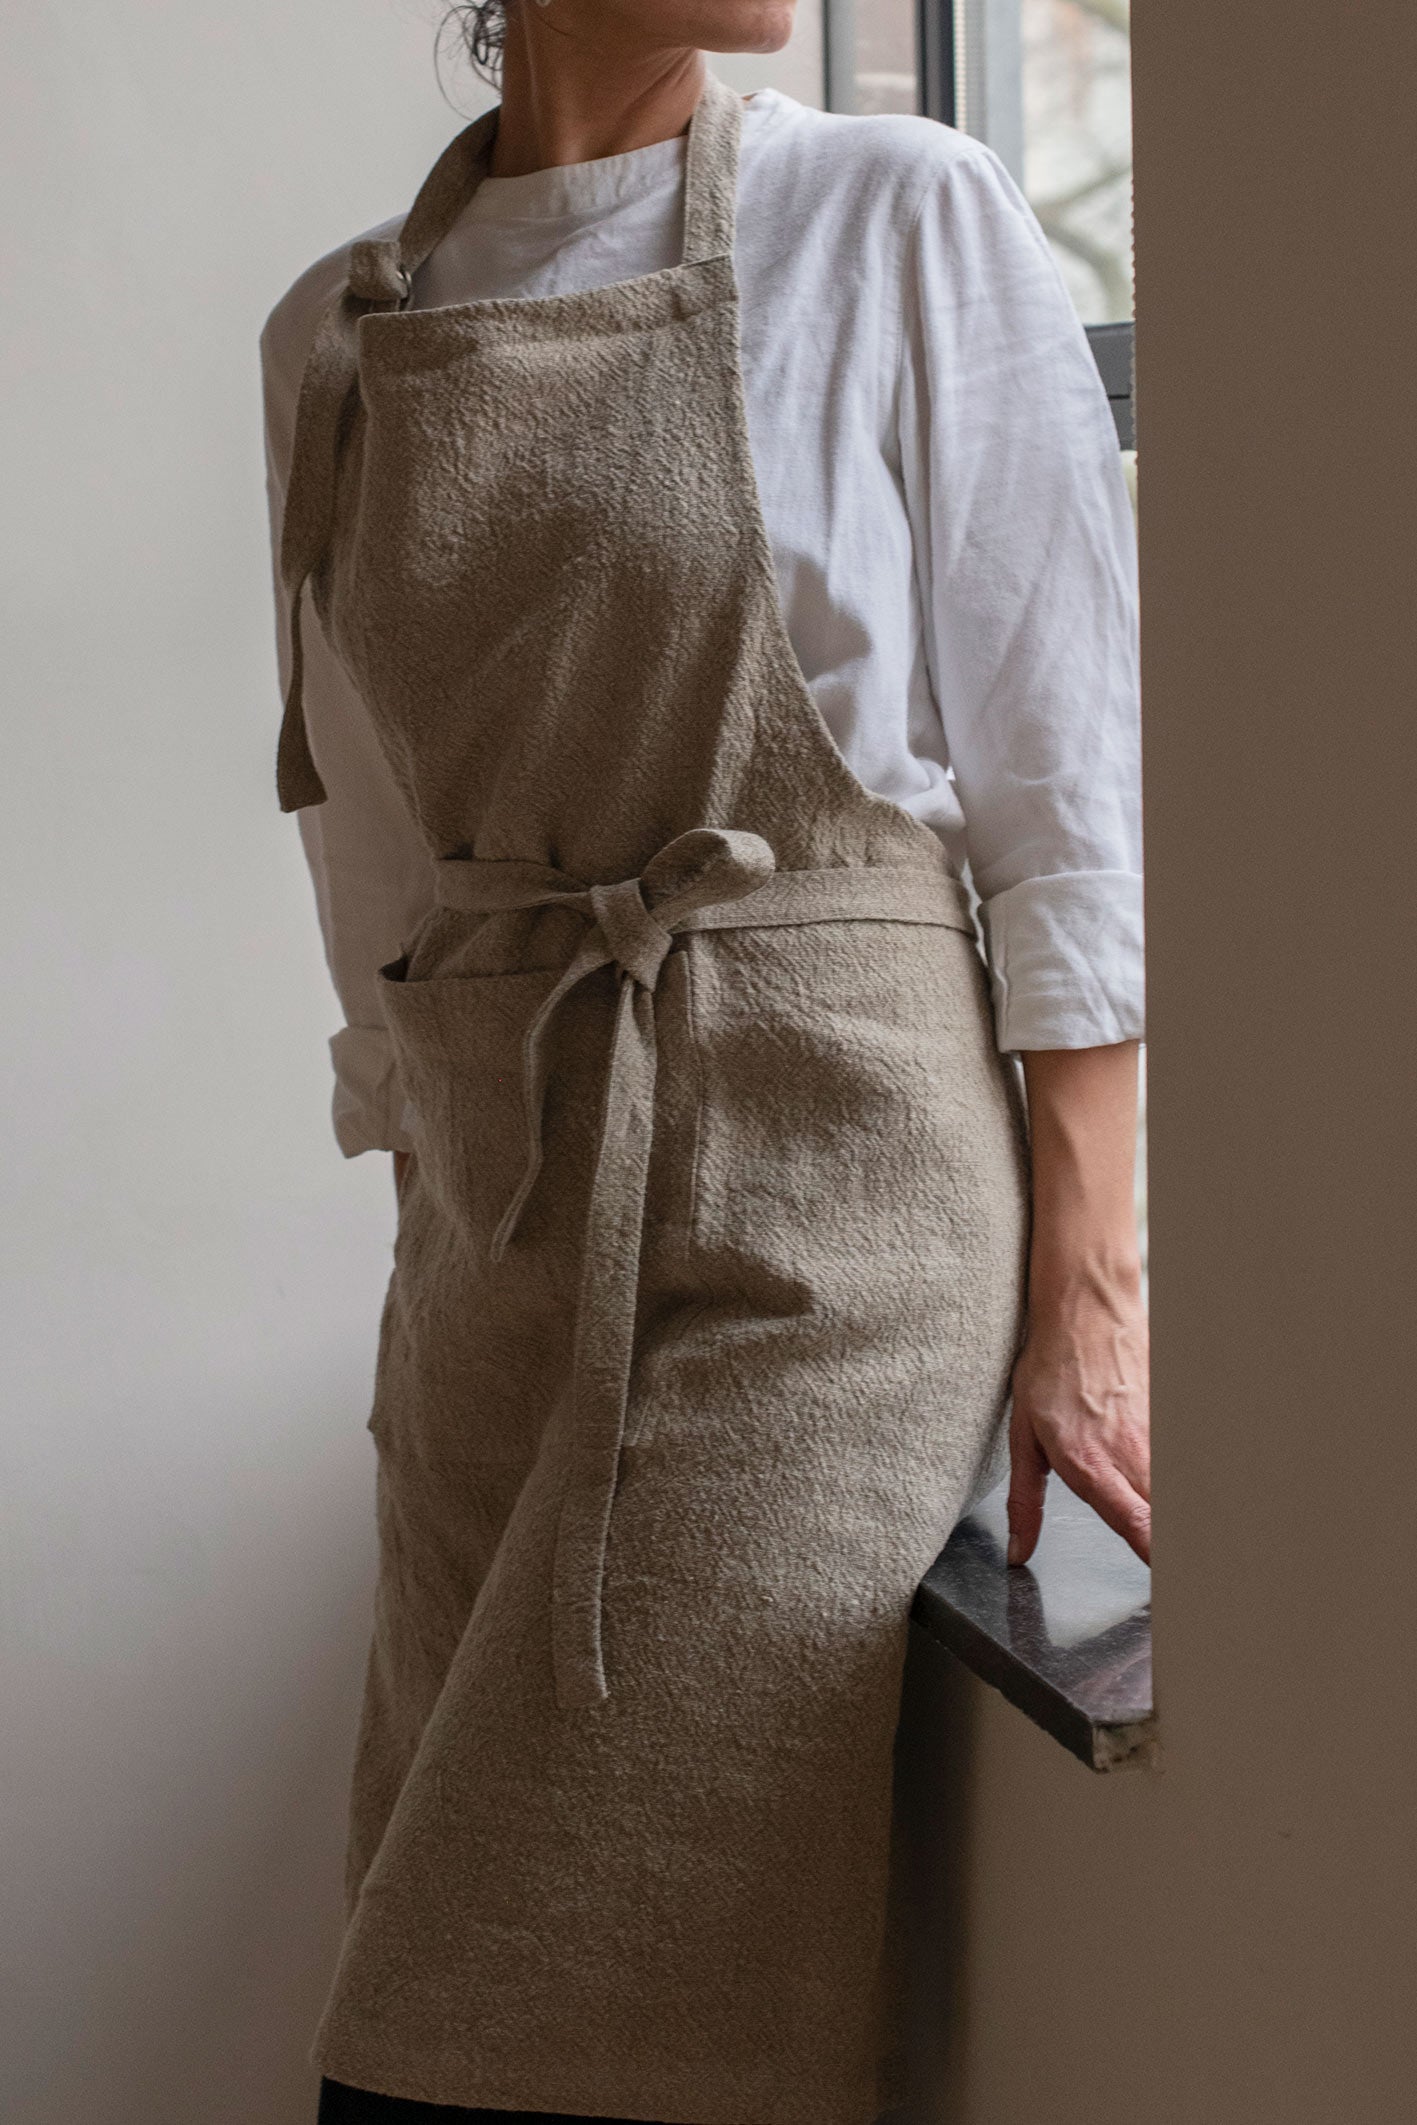 Timeless Linen Apron by Timeless Linen, worn by woman.